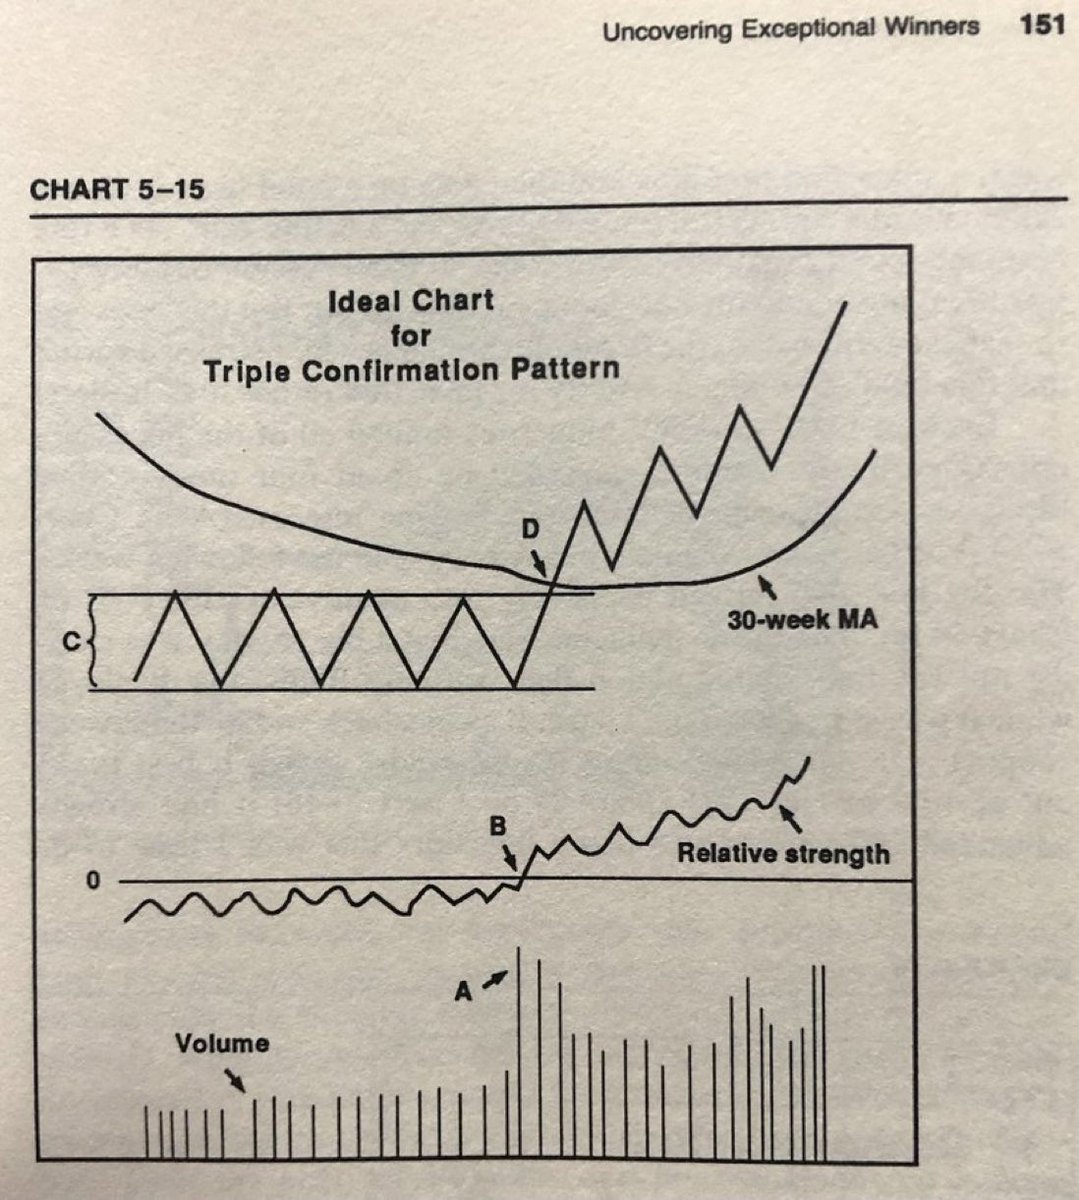 Triple bullish confluence chart pattern from  “Secrets For Profiting In Bull and Bear Markets” by Stan Weinstein

(30-week moving average is approximately the 150-day moving average)